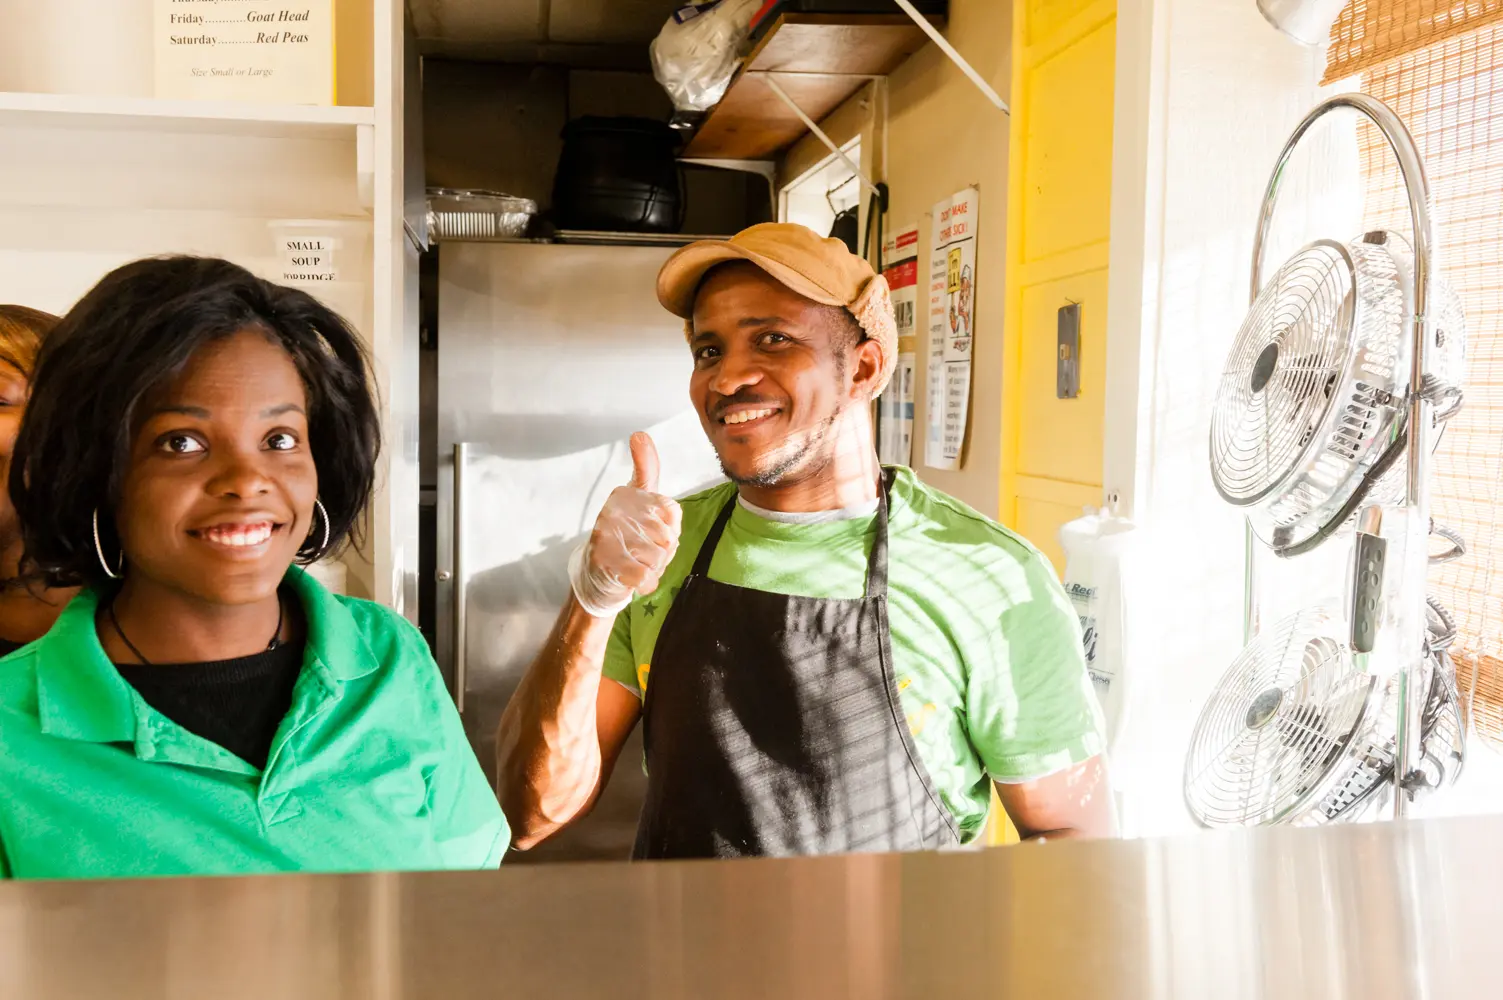 A man and woman in an apron smile for the camera.